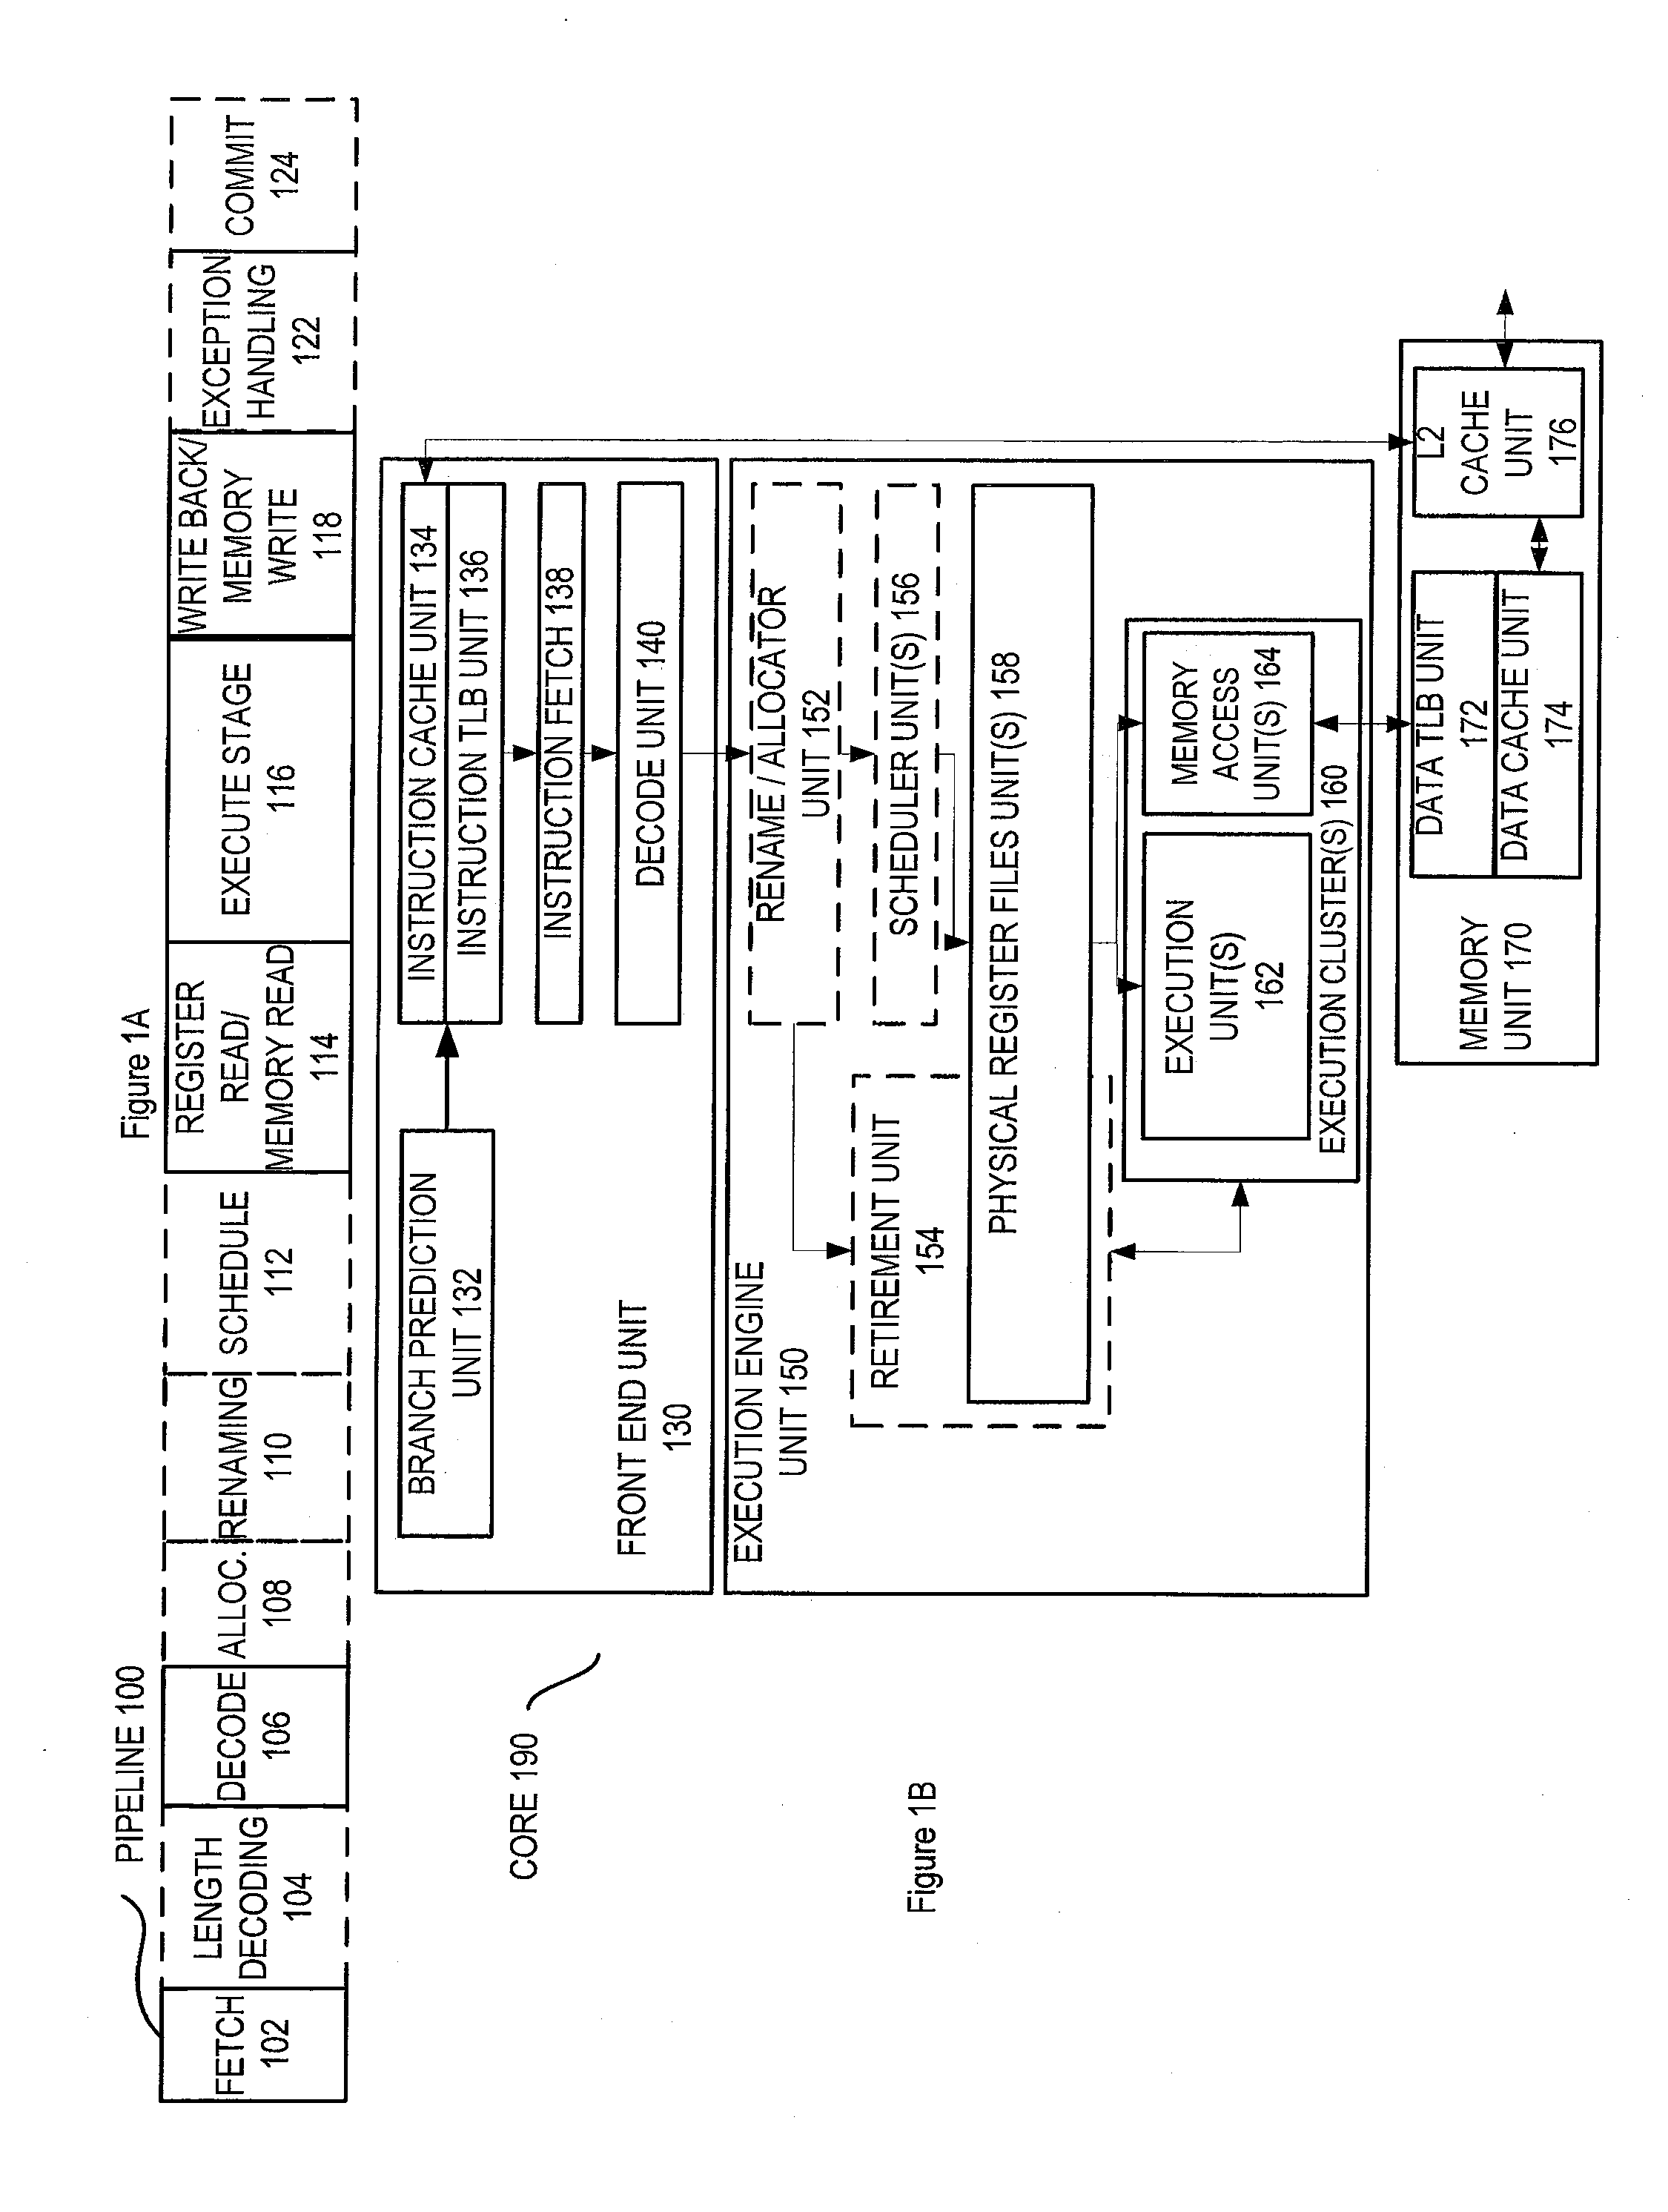 Apparatus and method for detecting identical elements within a vector register